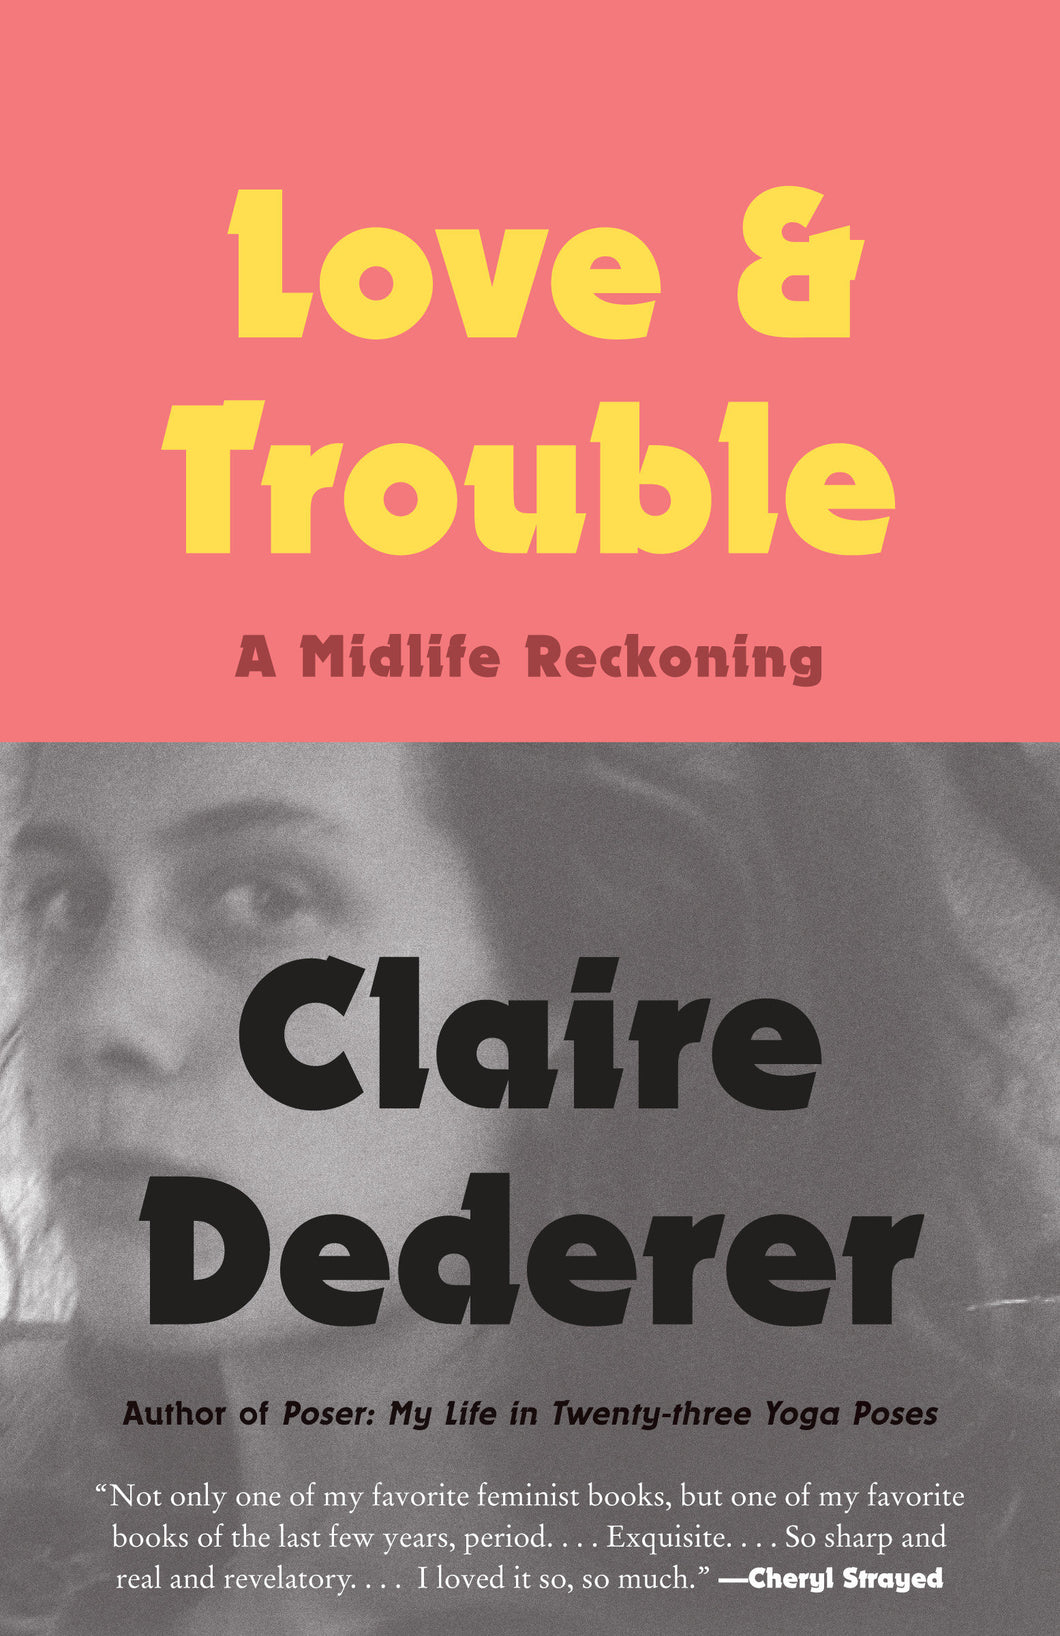 Love and Trouble: A Midlife Reckoning